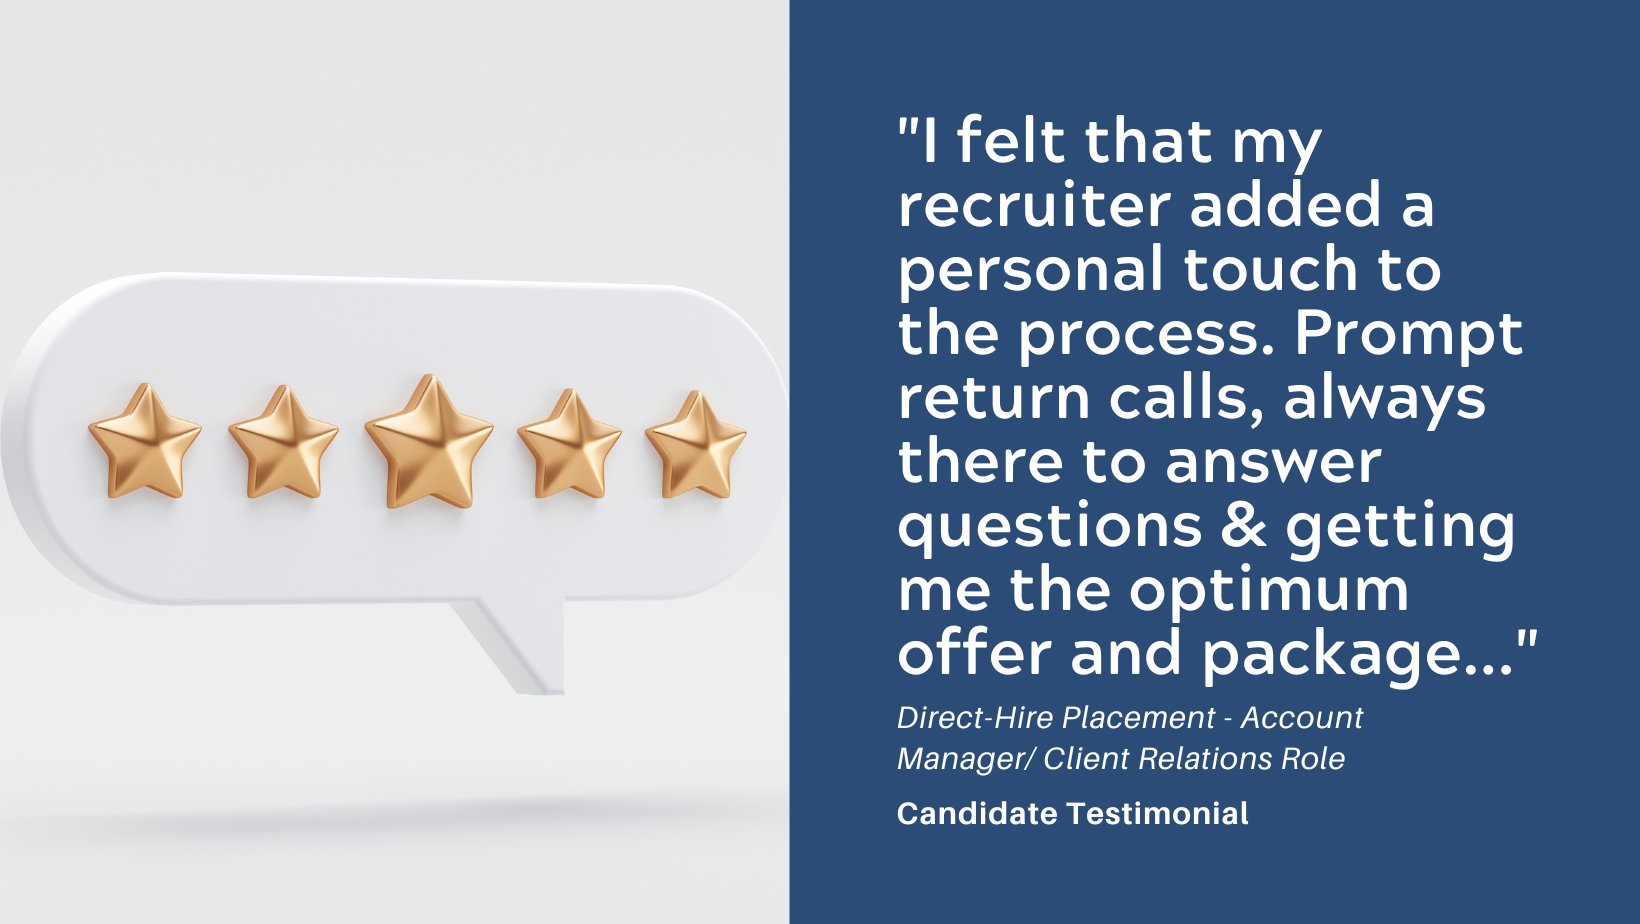 Candidate Testimonial – Direct-Hire Placement, Sales Client Relations Role